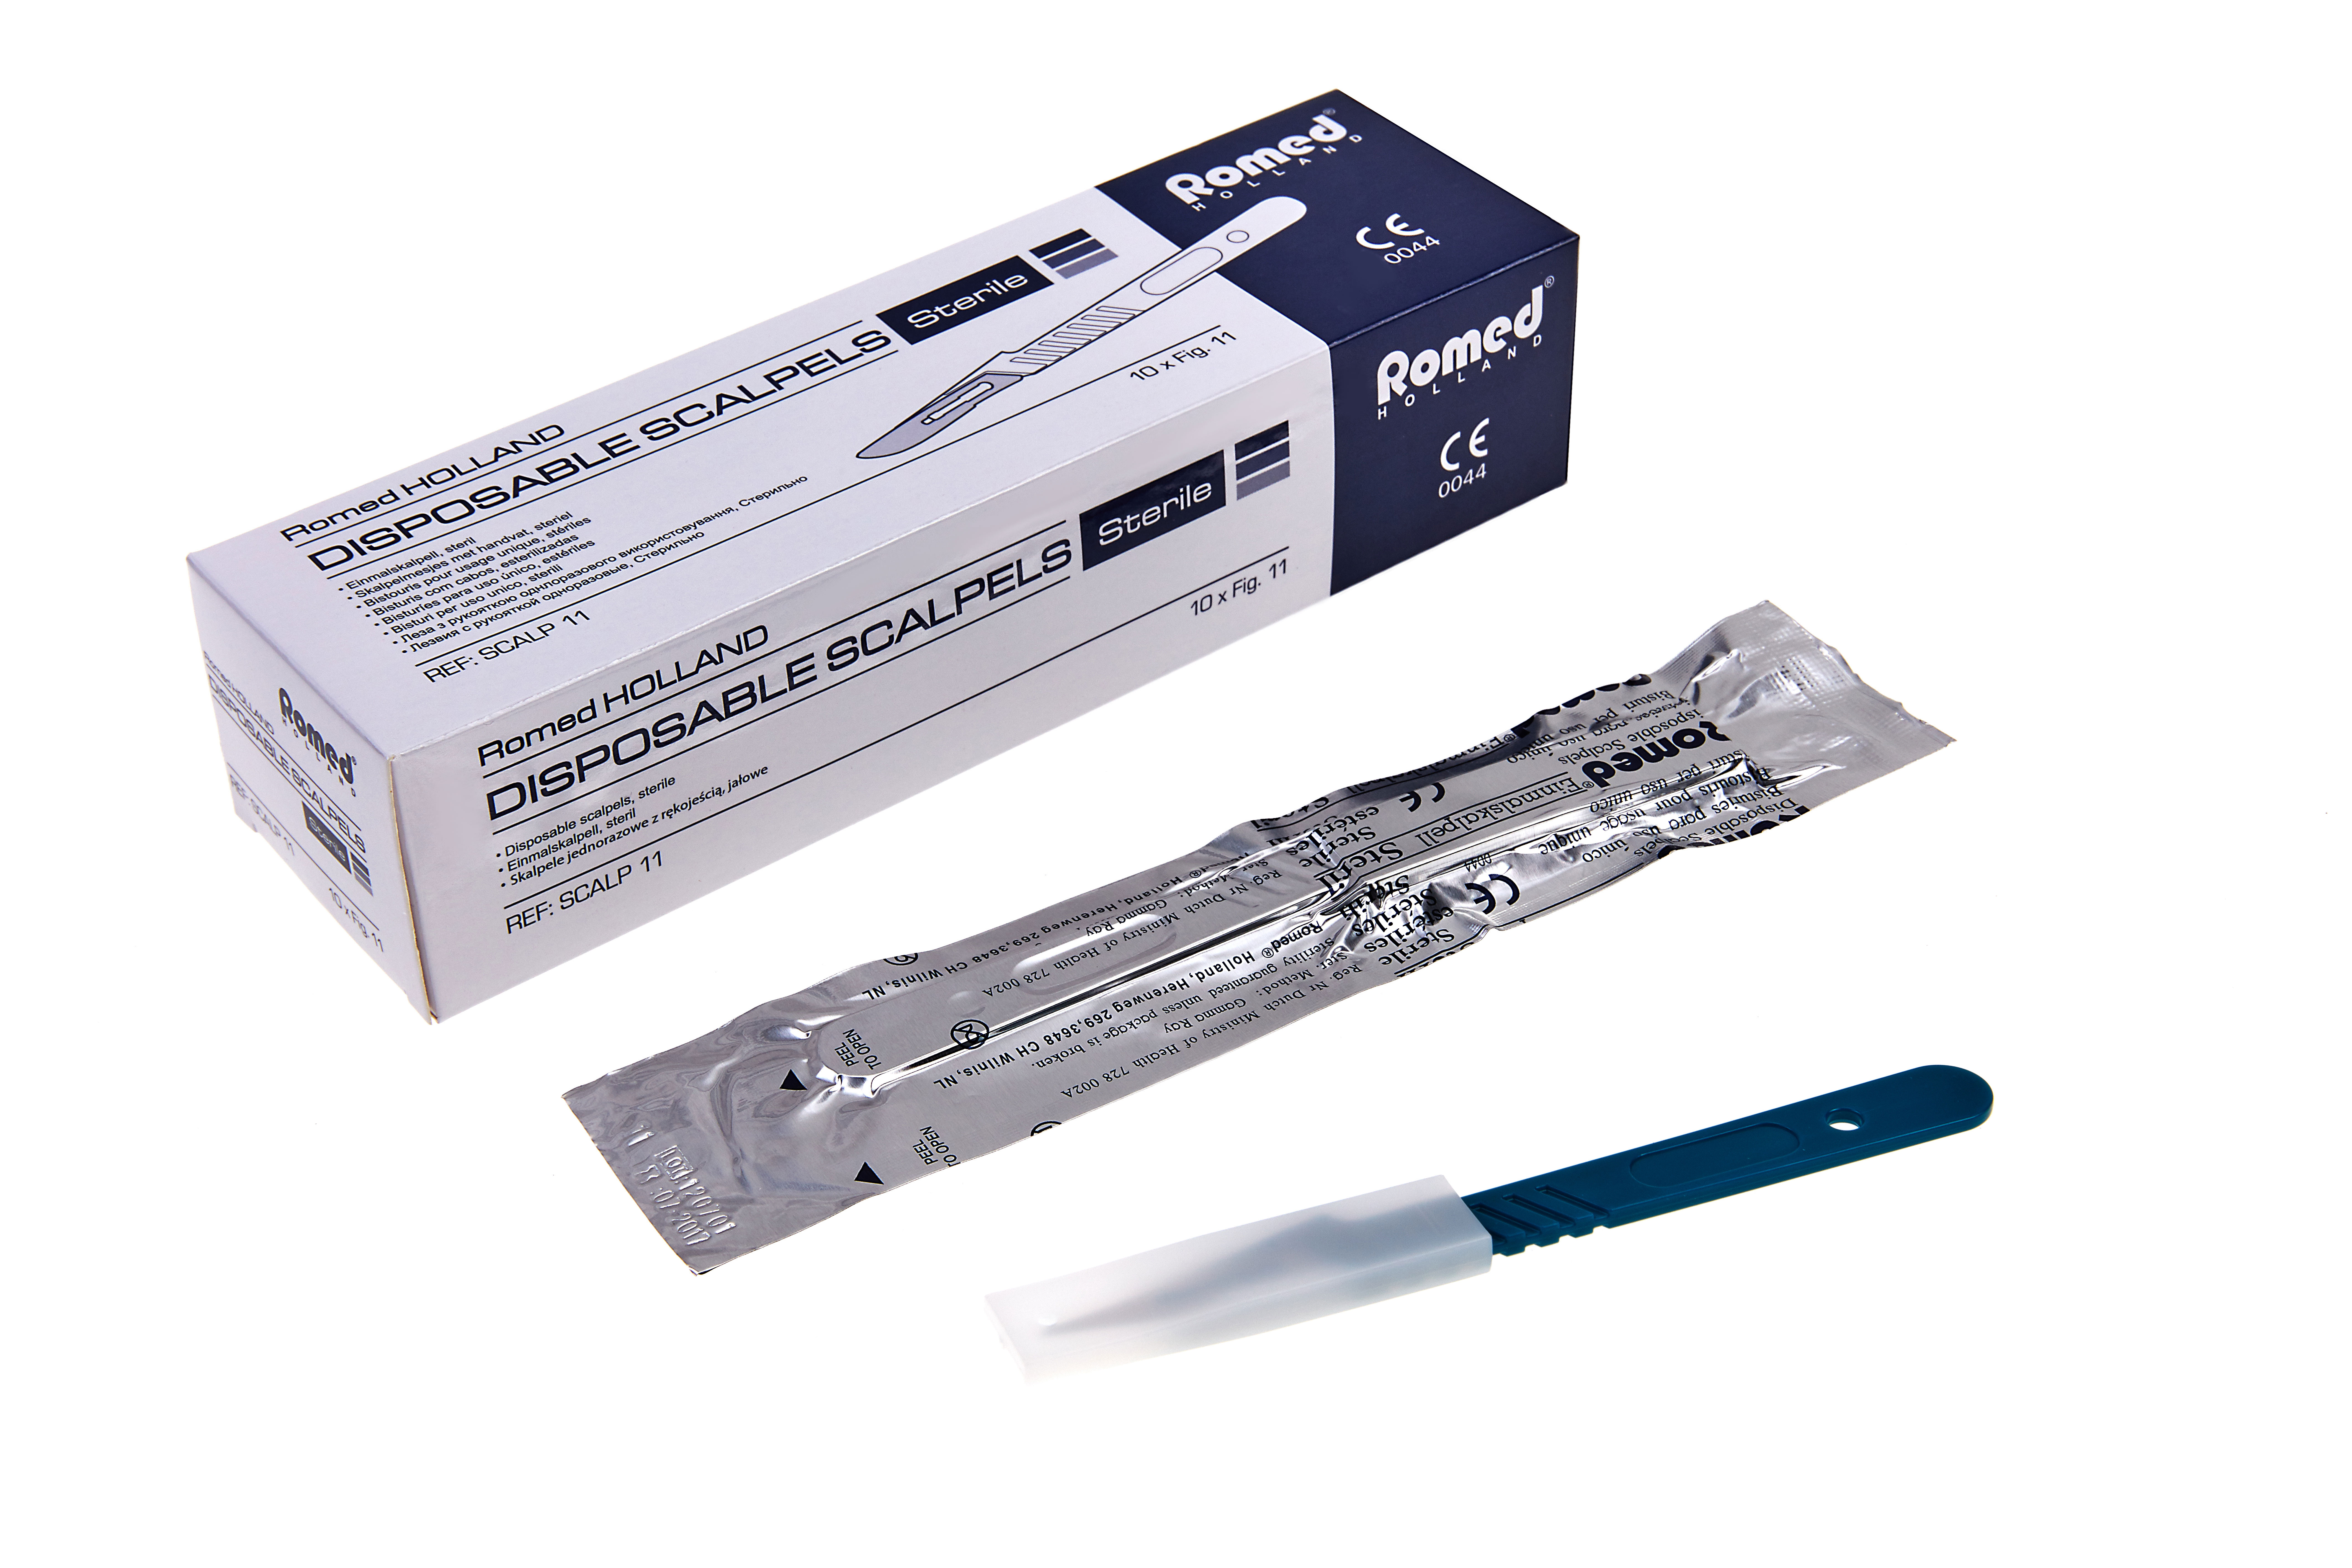 SCALP-10 Romed scalpels complete with handle, no. 10, sterile per piece, 10 pcs in an inner box, 50 x 10 pcs = 500 pcs in a carton.